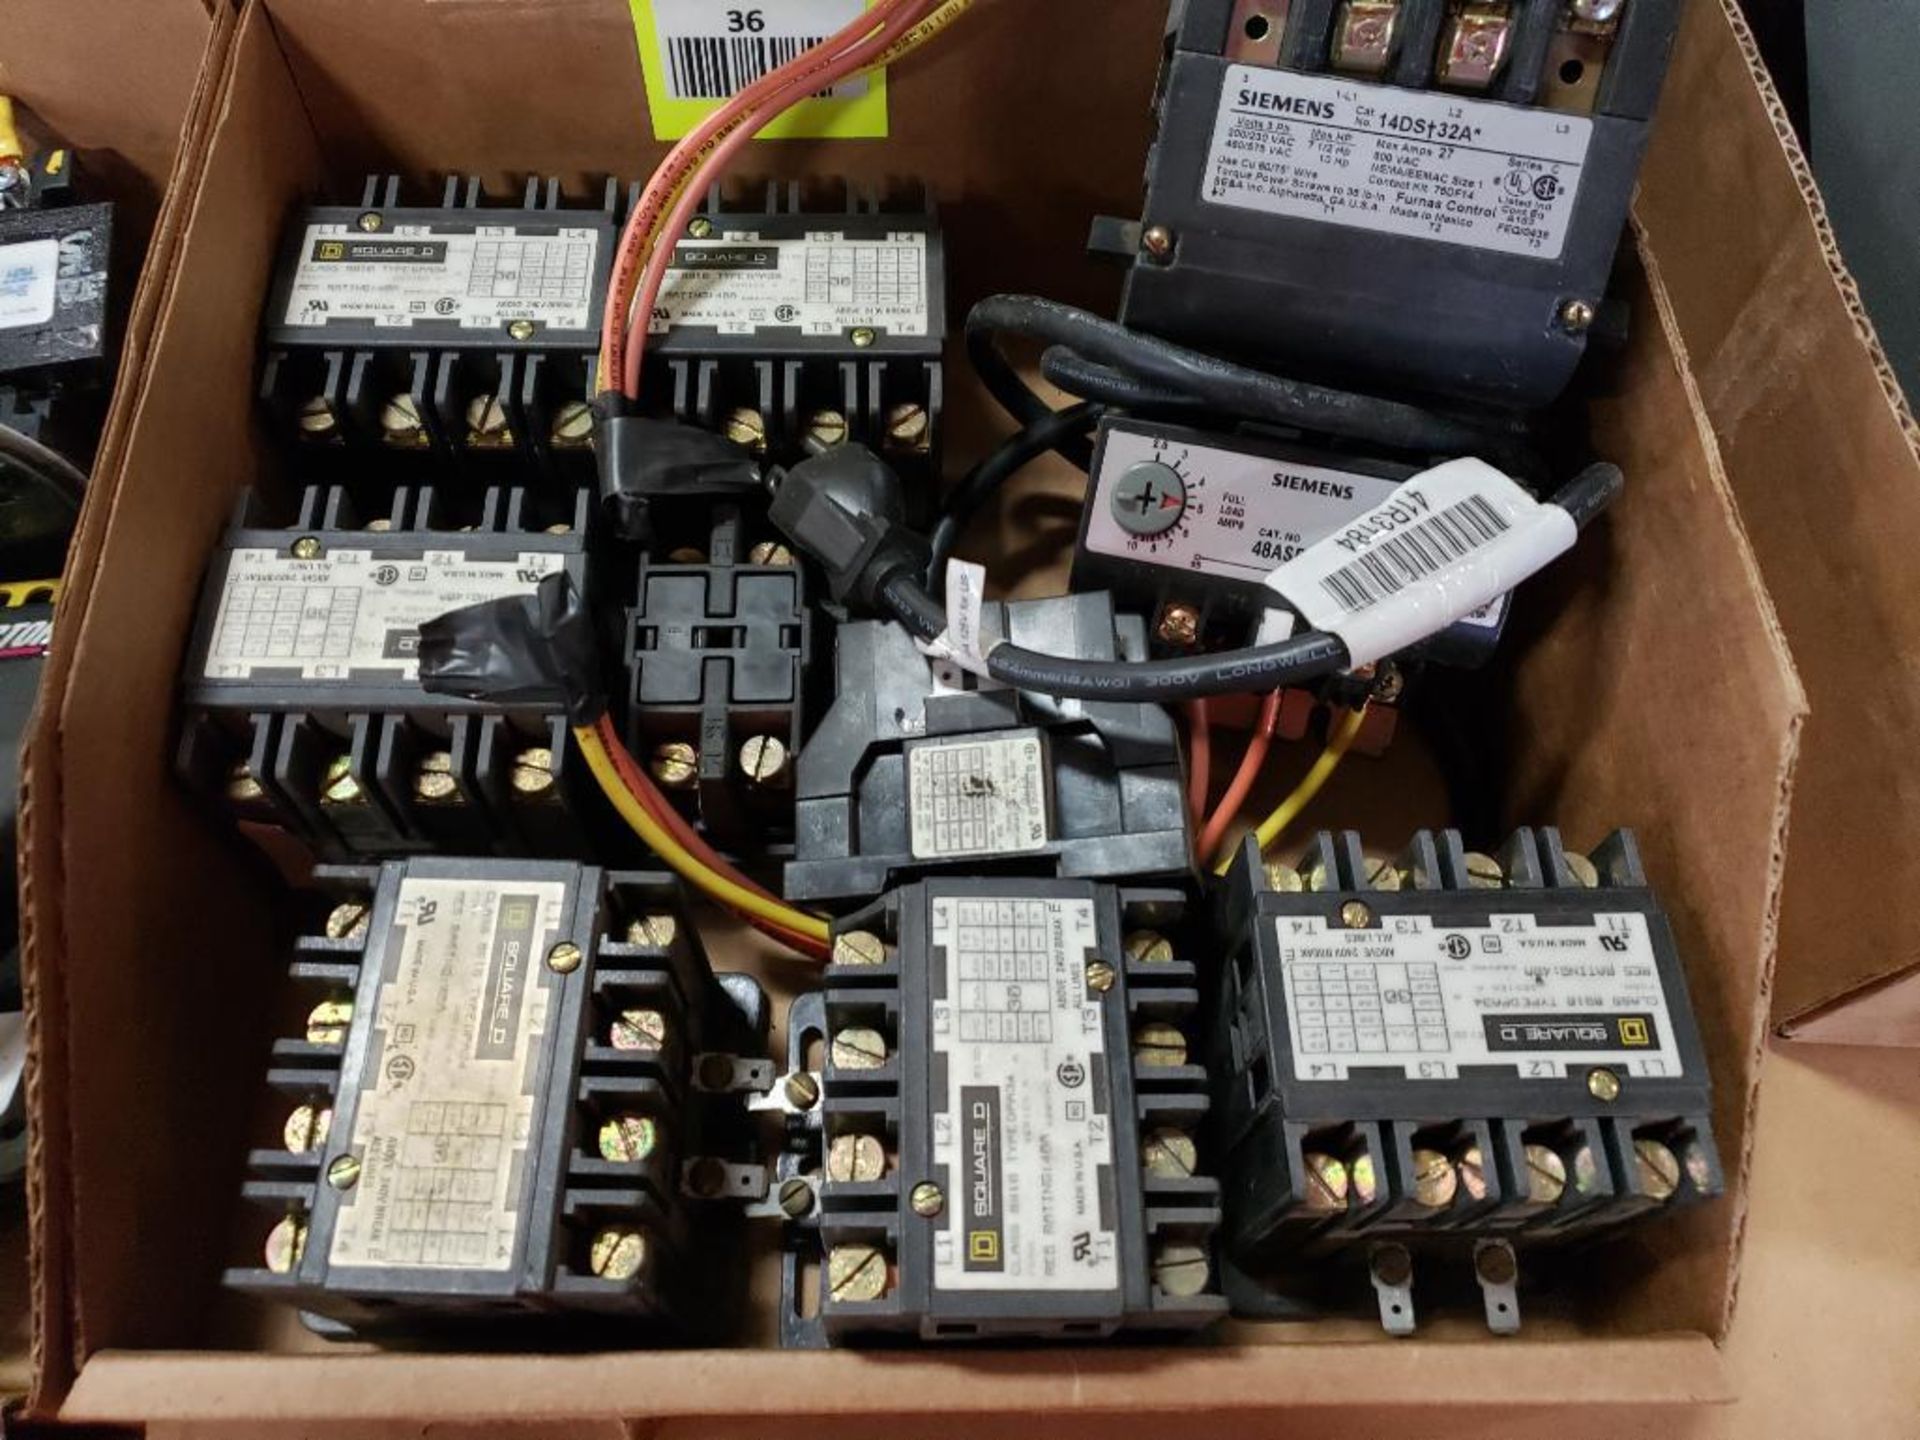 Assorted electrical contactor, relay. Square-D, Siemens.